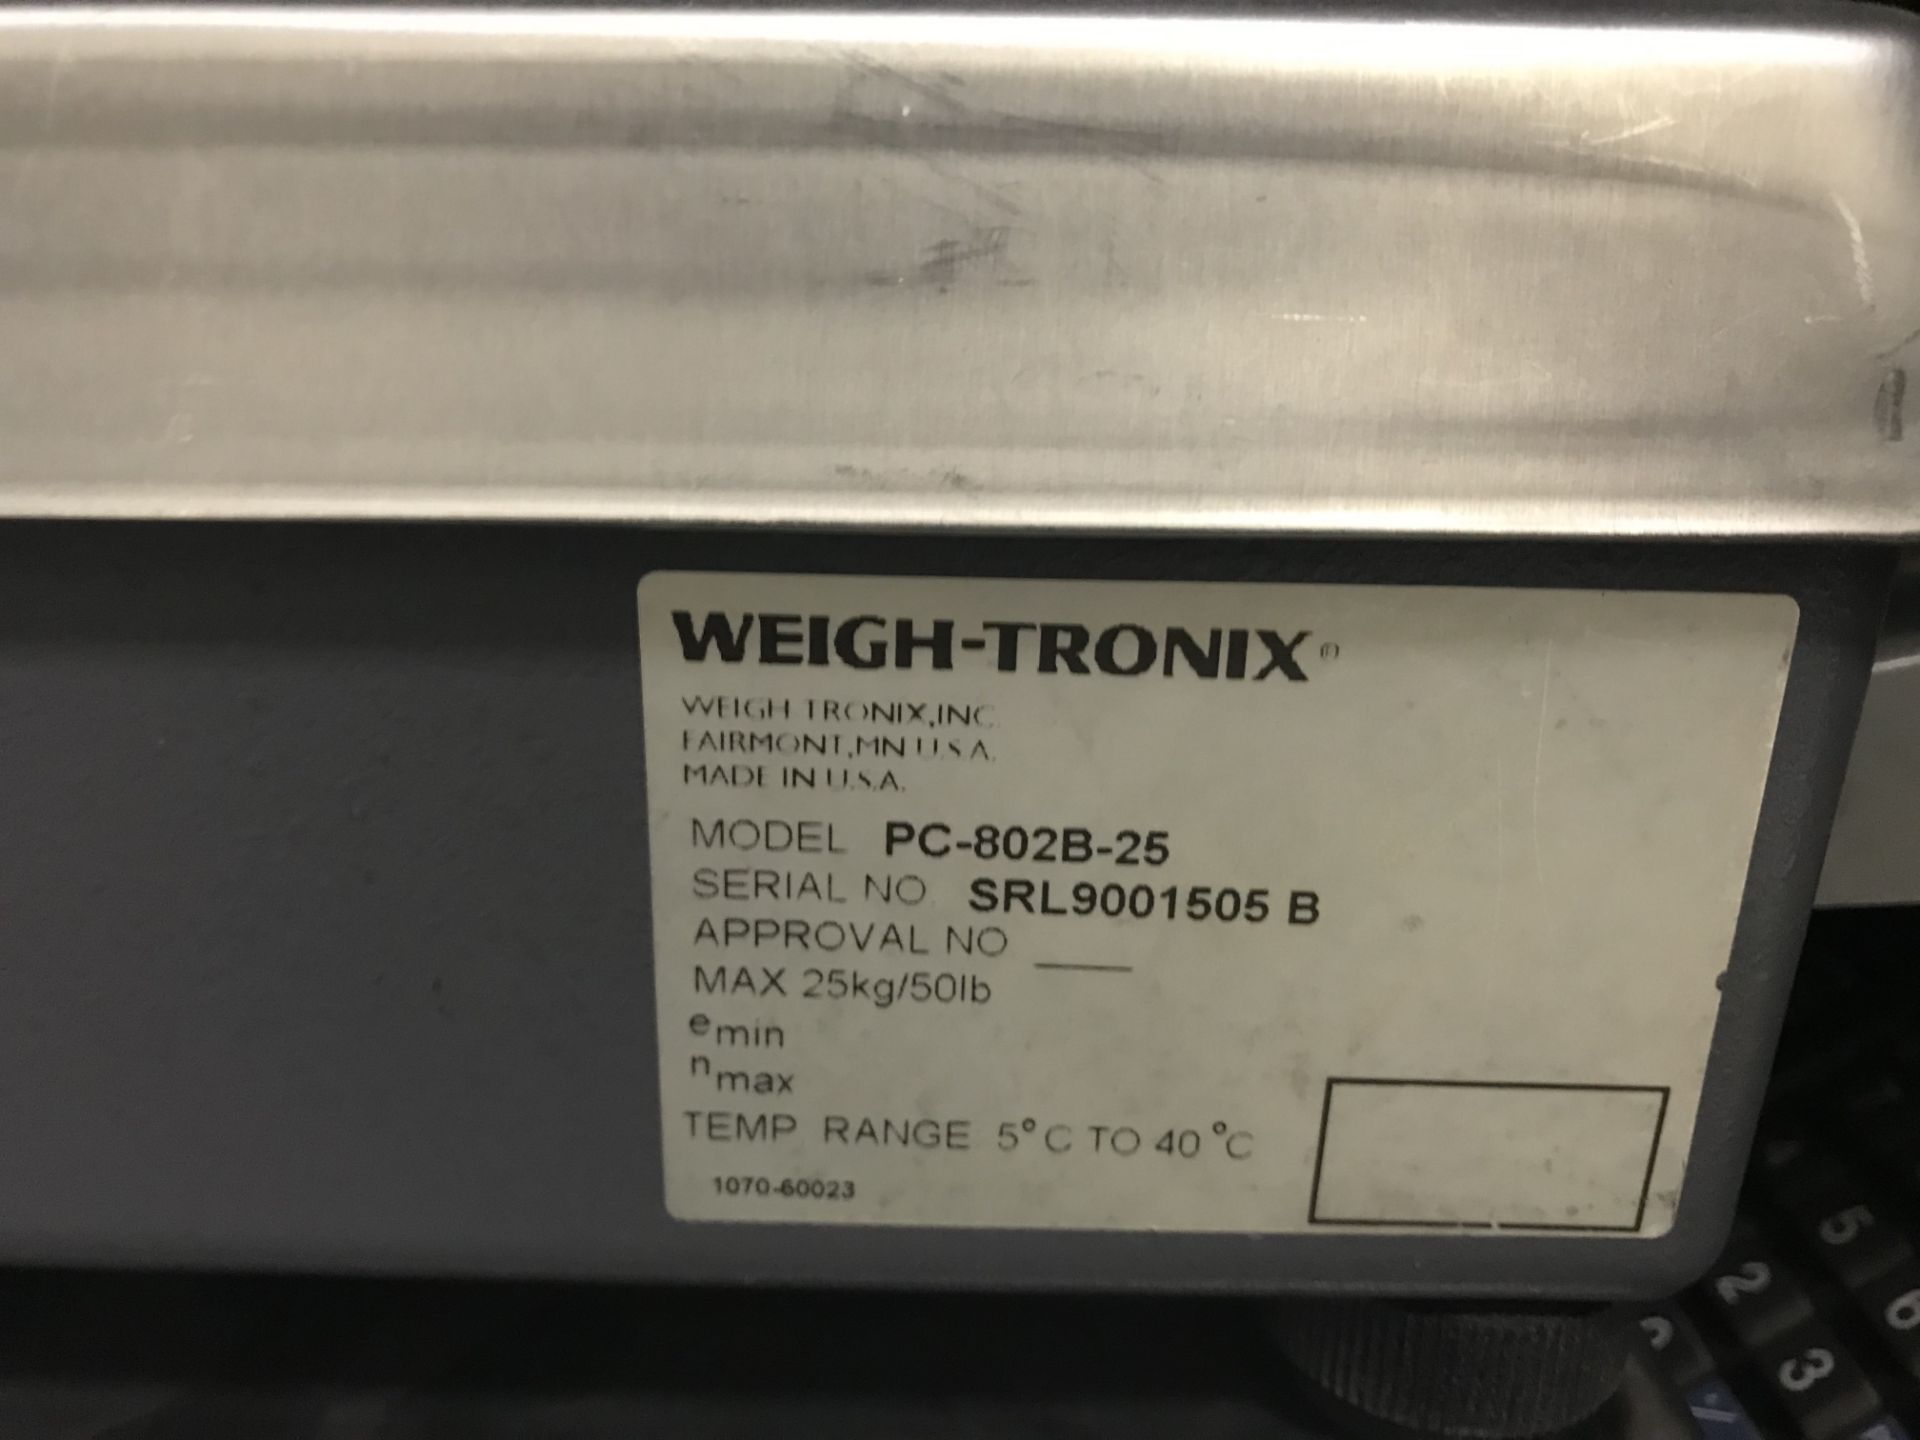 (6) Scales, (4) Weigh-Tronix Scales, Model# PC-802B-25; (1) Weight-Tronix, Model# 6230, Cap 25 - Image 3 of 8